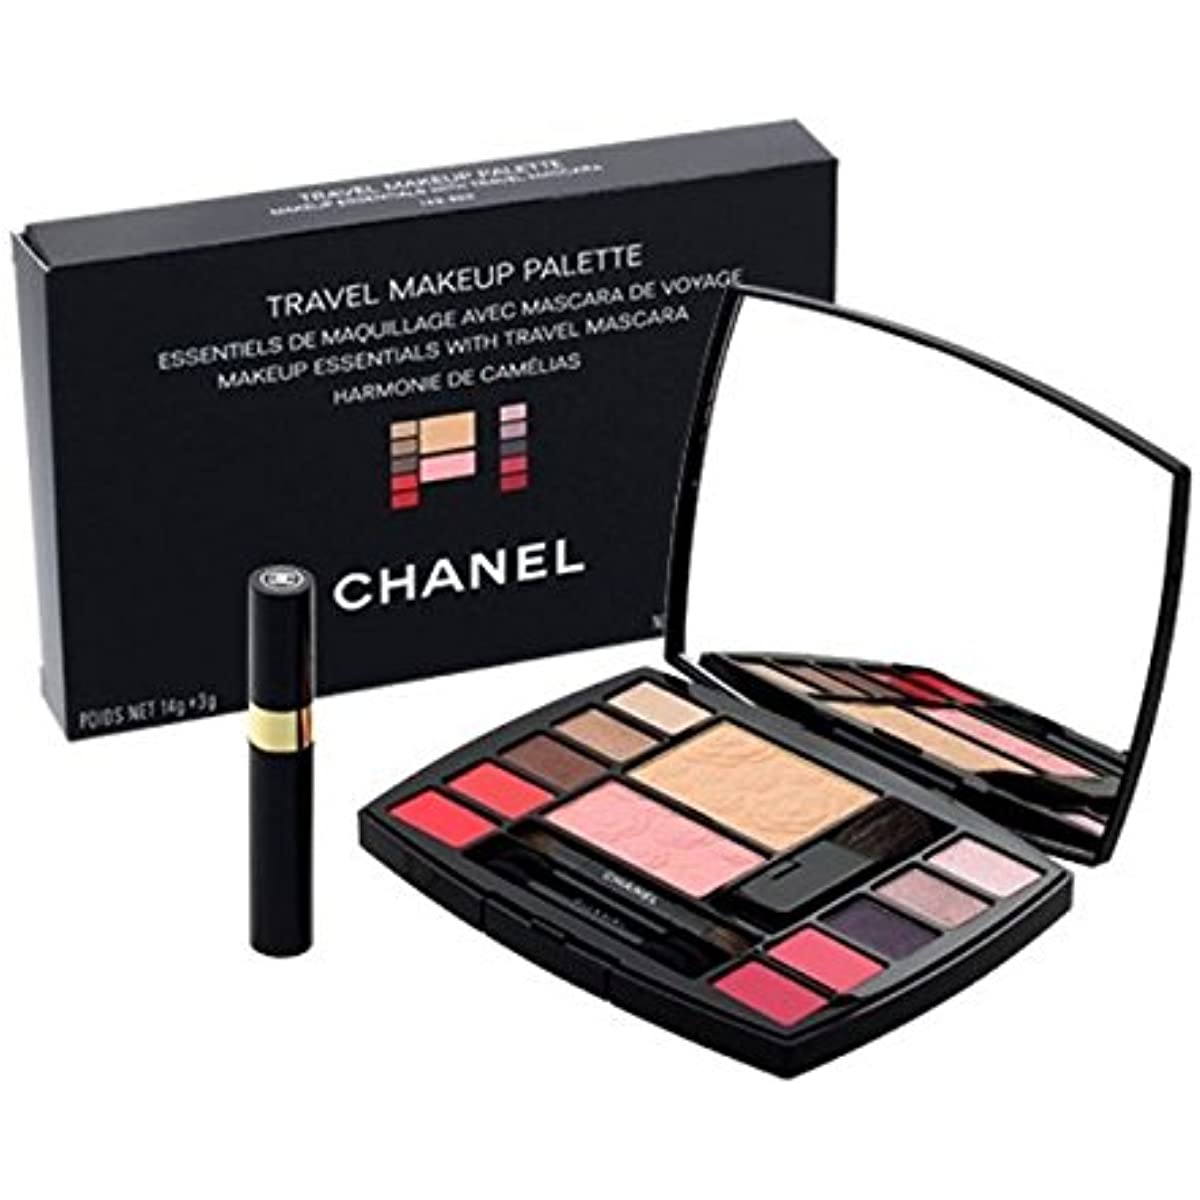 Chanel Travel Makeup Palette #Armonide Camellia [2018, overseas limited  edition]